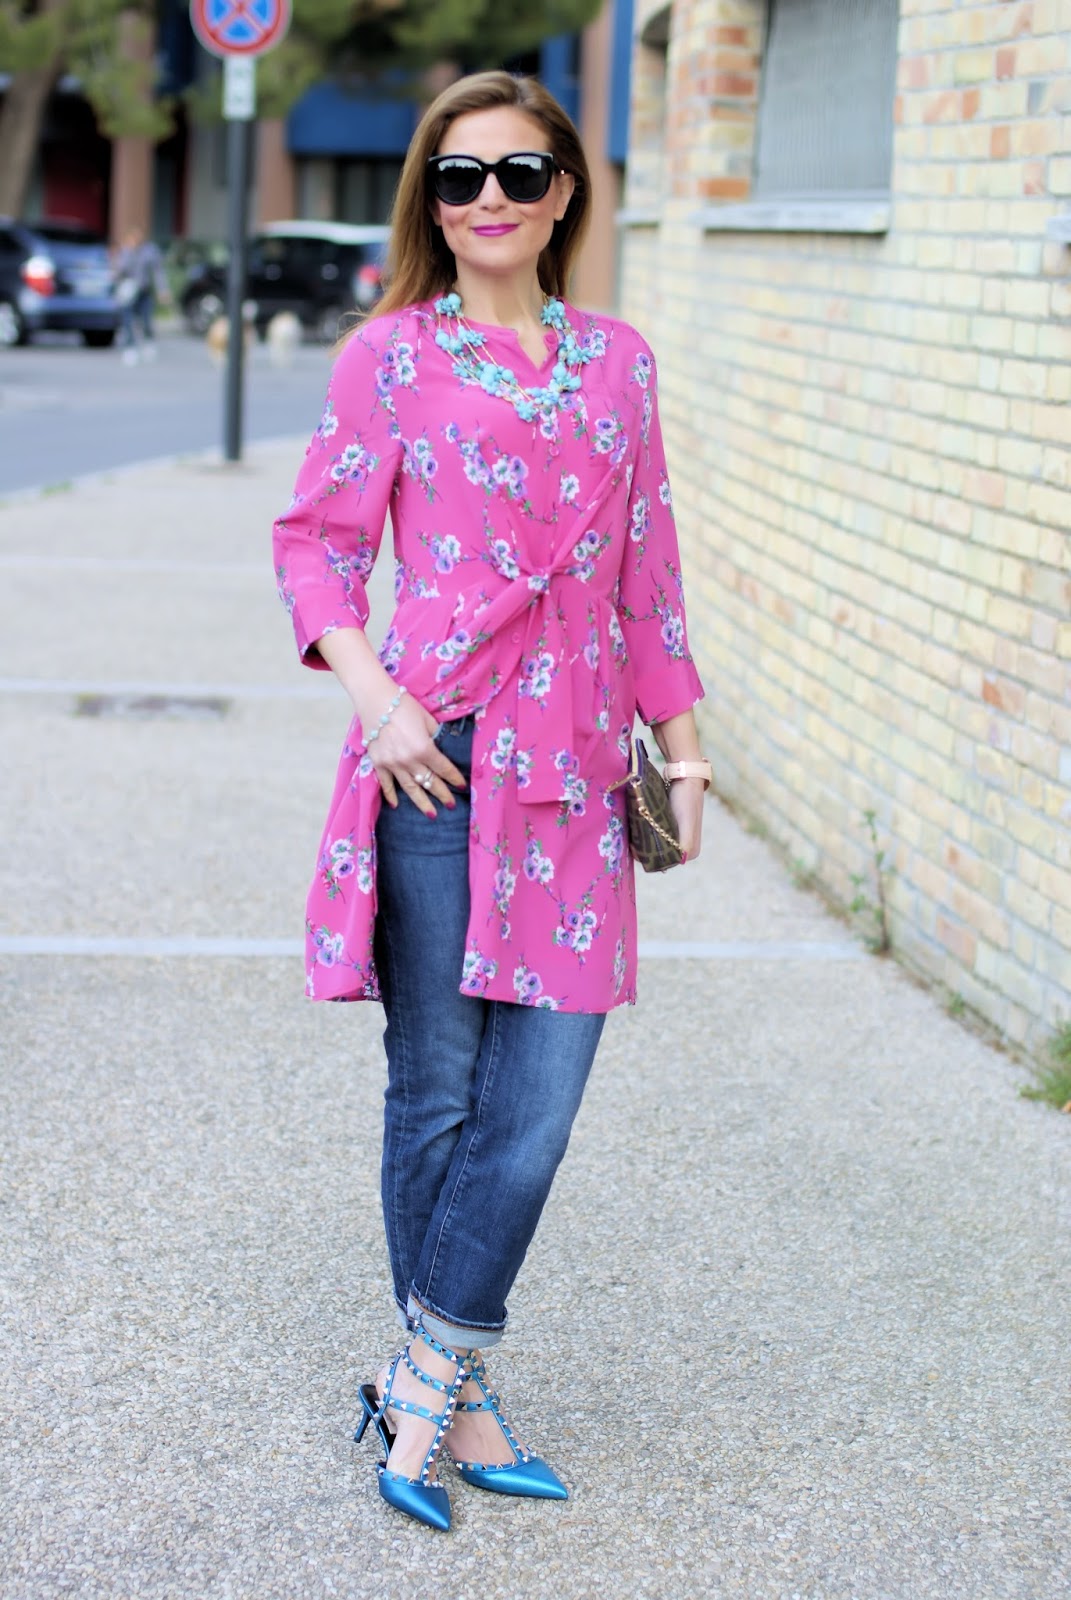 How to wear a dress over jeans: outfit idea with Metisu dress | Fashion ...